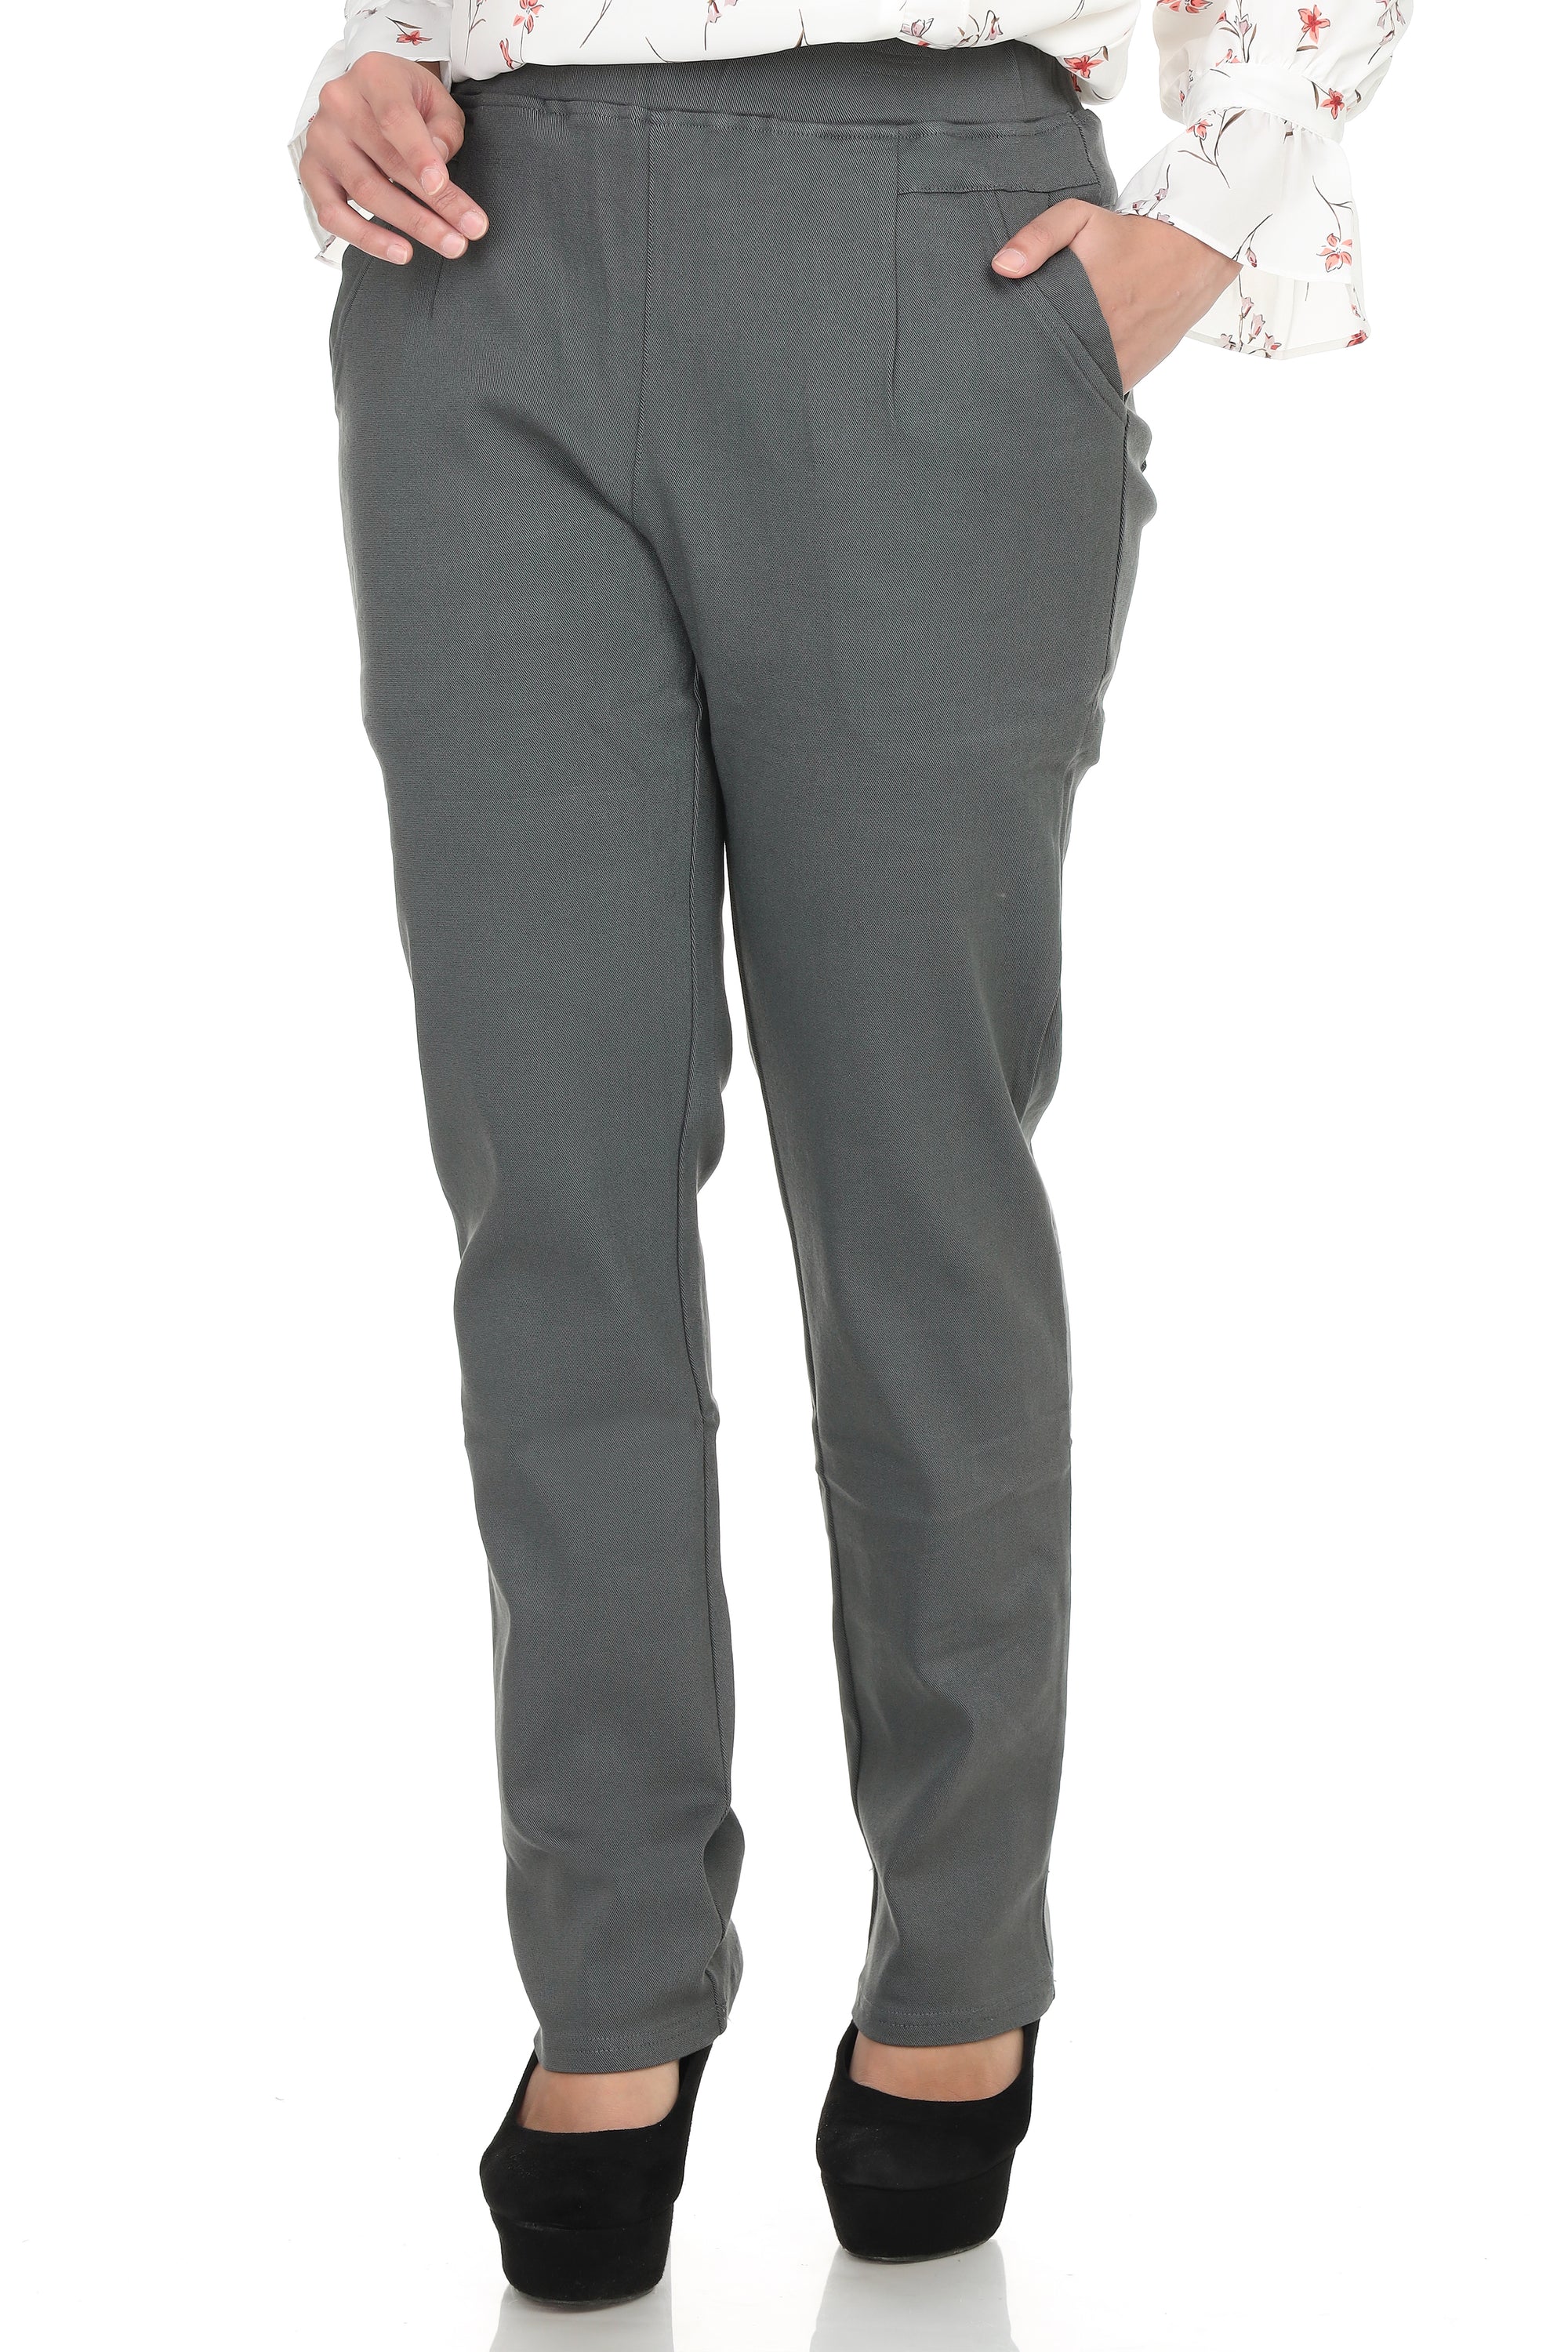 New Pant without Zipper (Thicker Material)- Grey